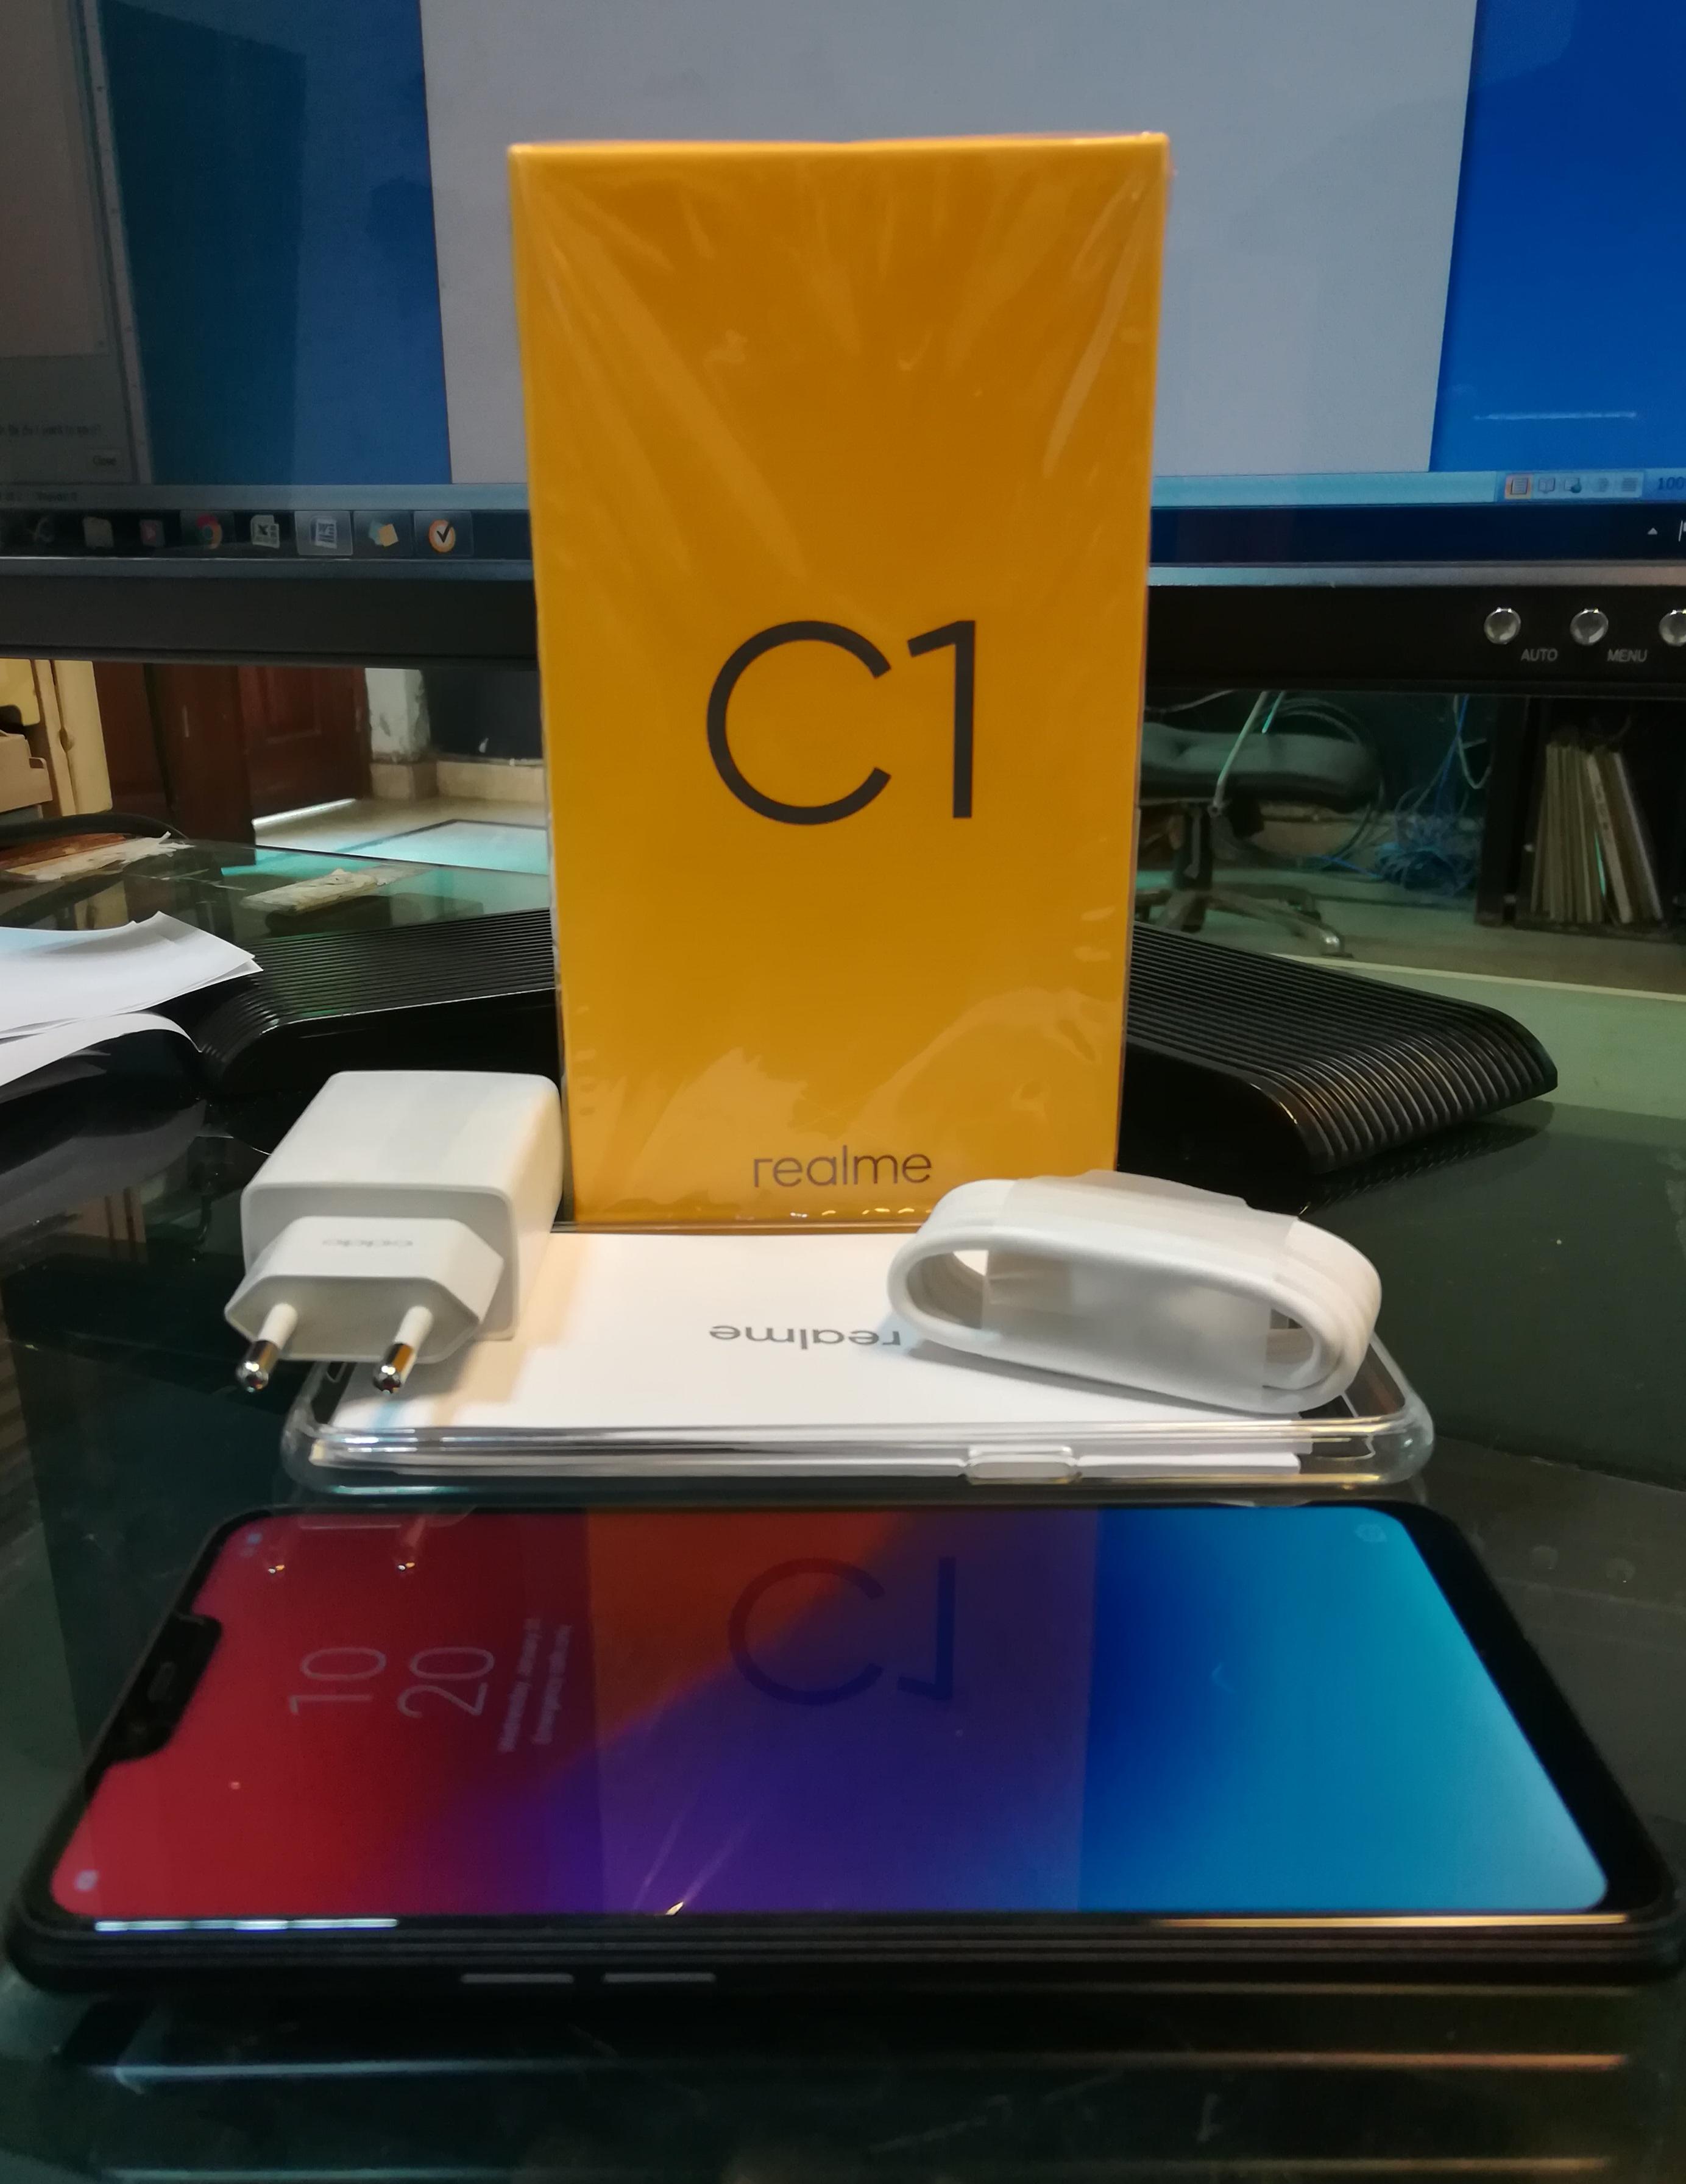 Review of Realme C1 recently launched in Pakistan.